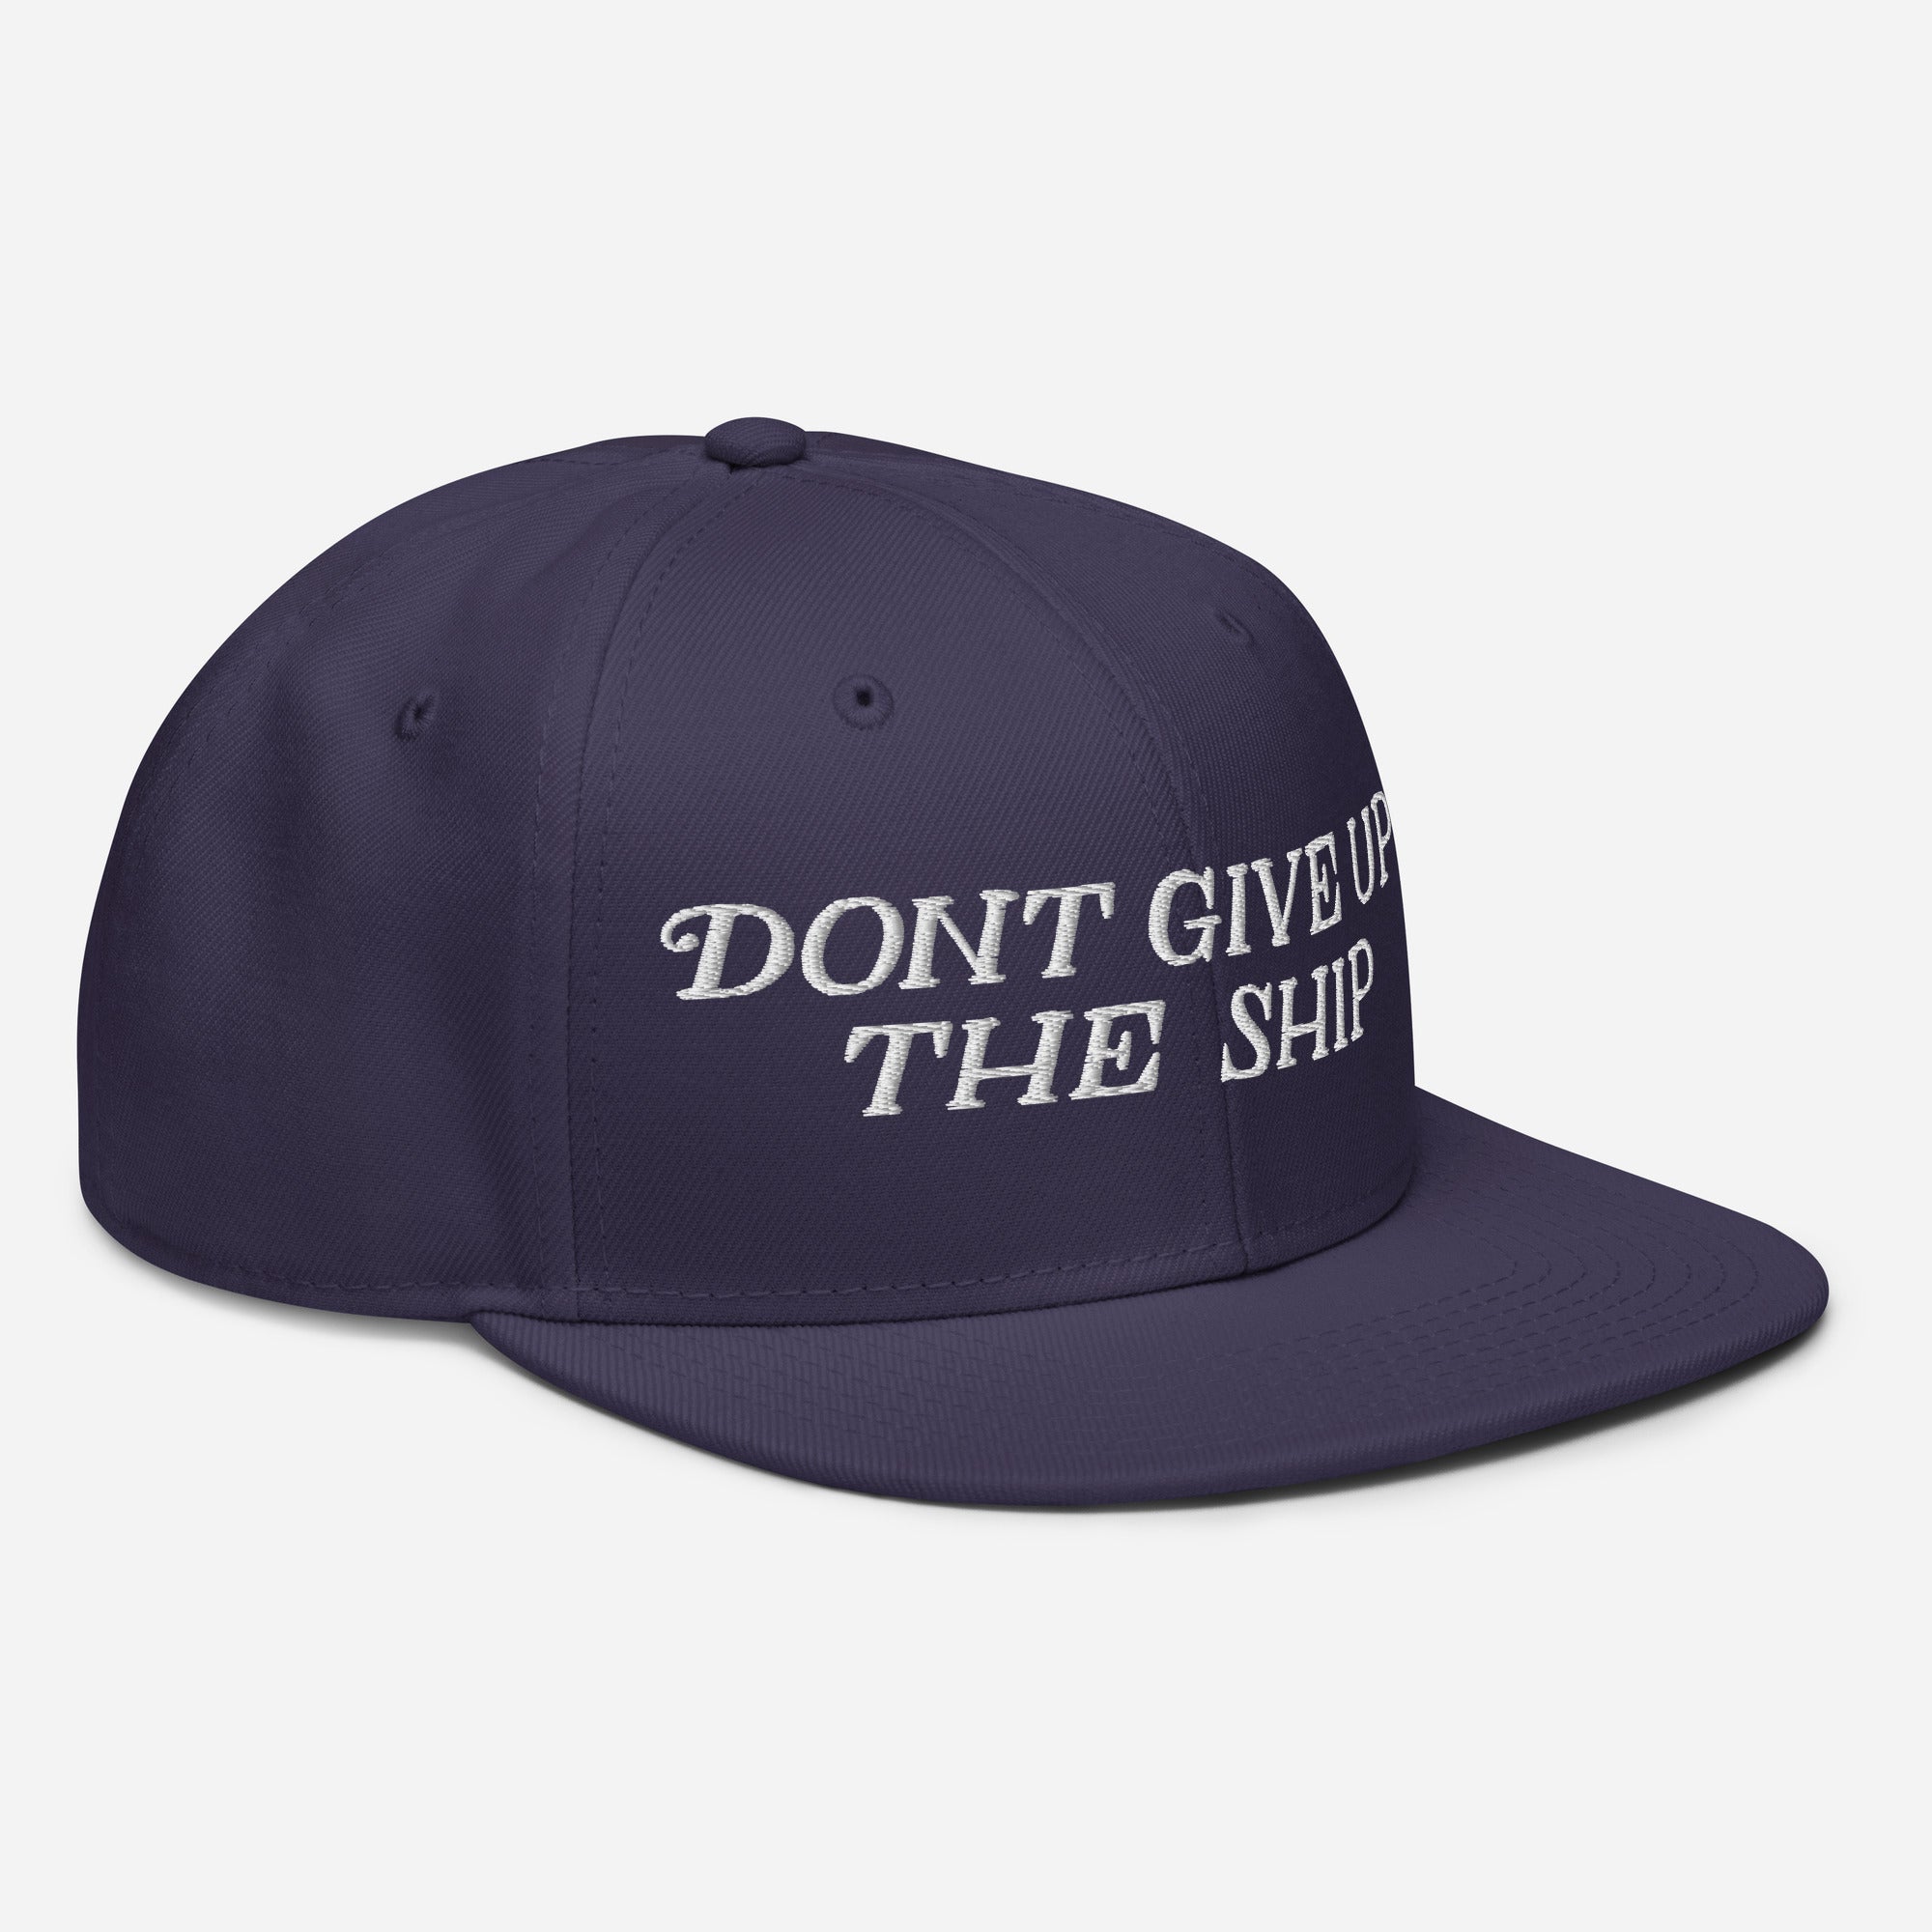 Don't Give Up The Ship Snapback Hat